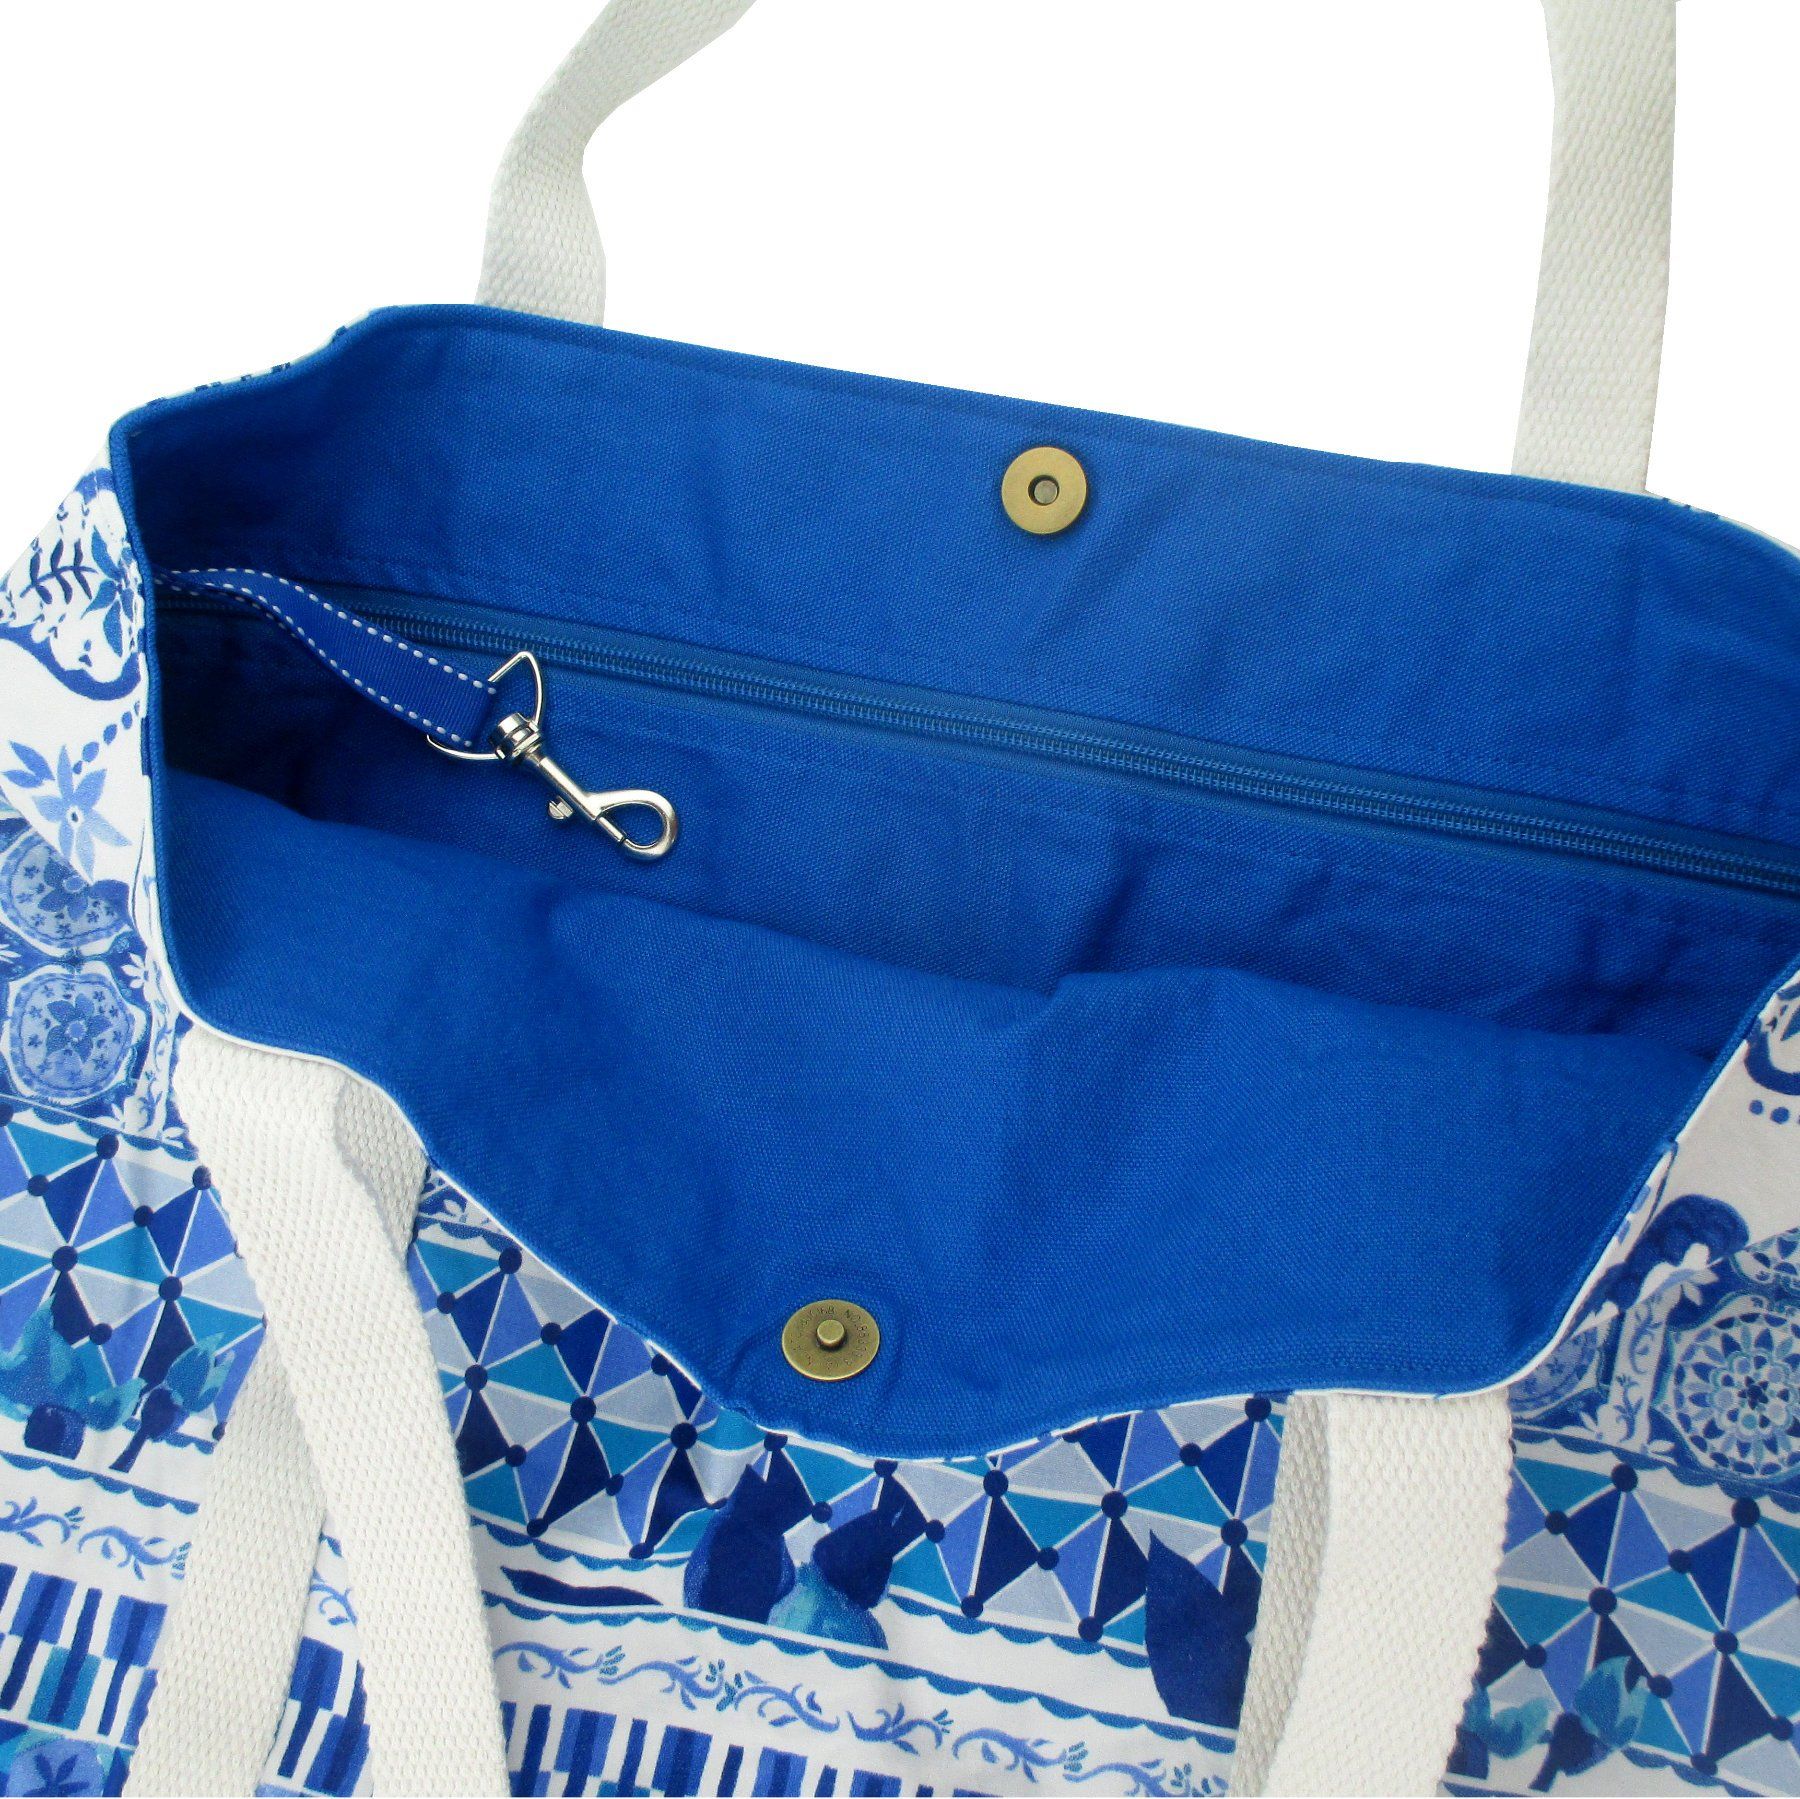 Blue Floral Paisley Mosaic All Over Print Pretty Canvas Tote Bag in White and Blue